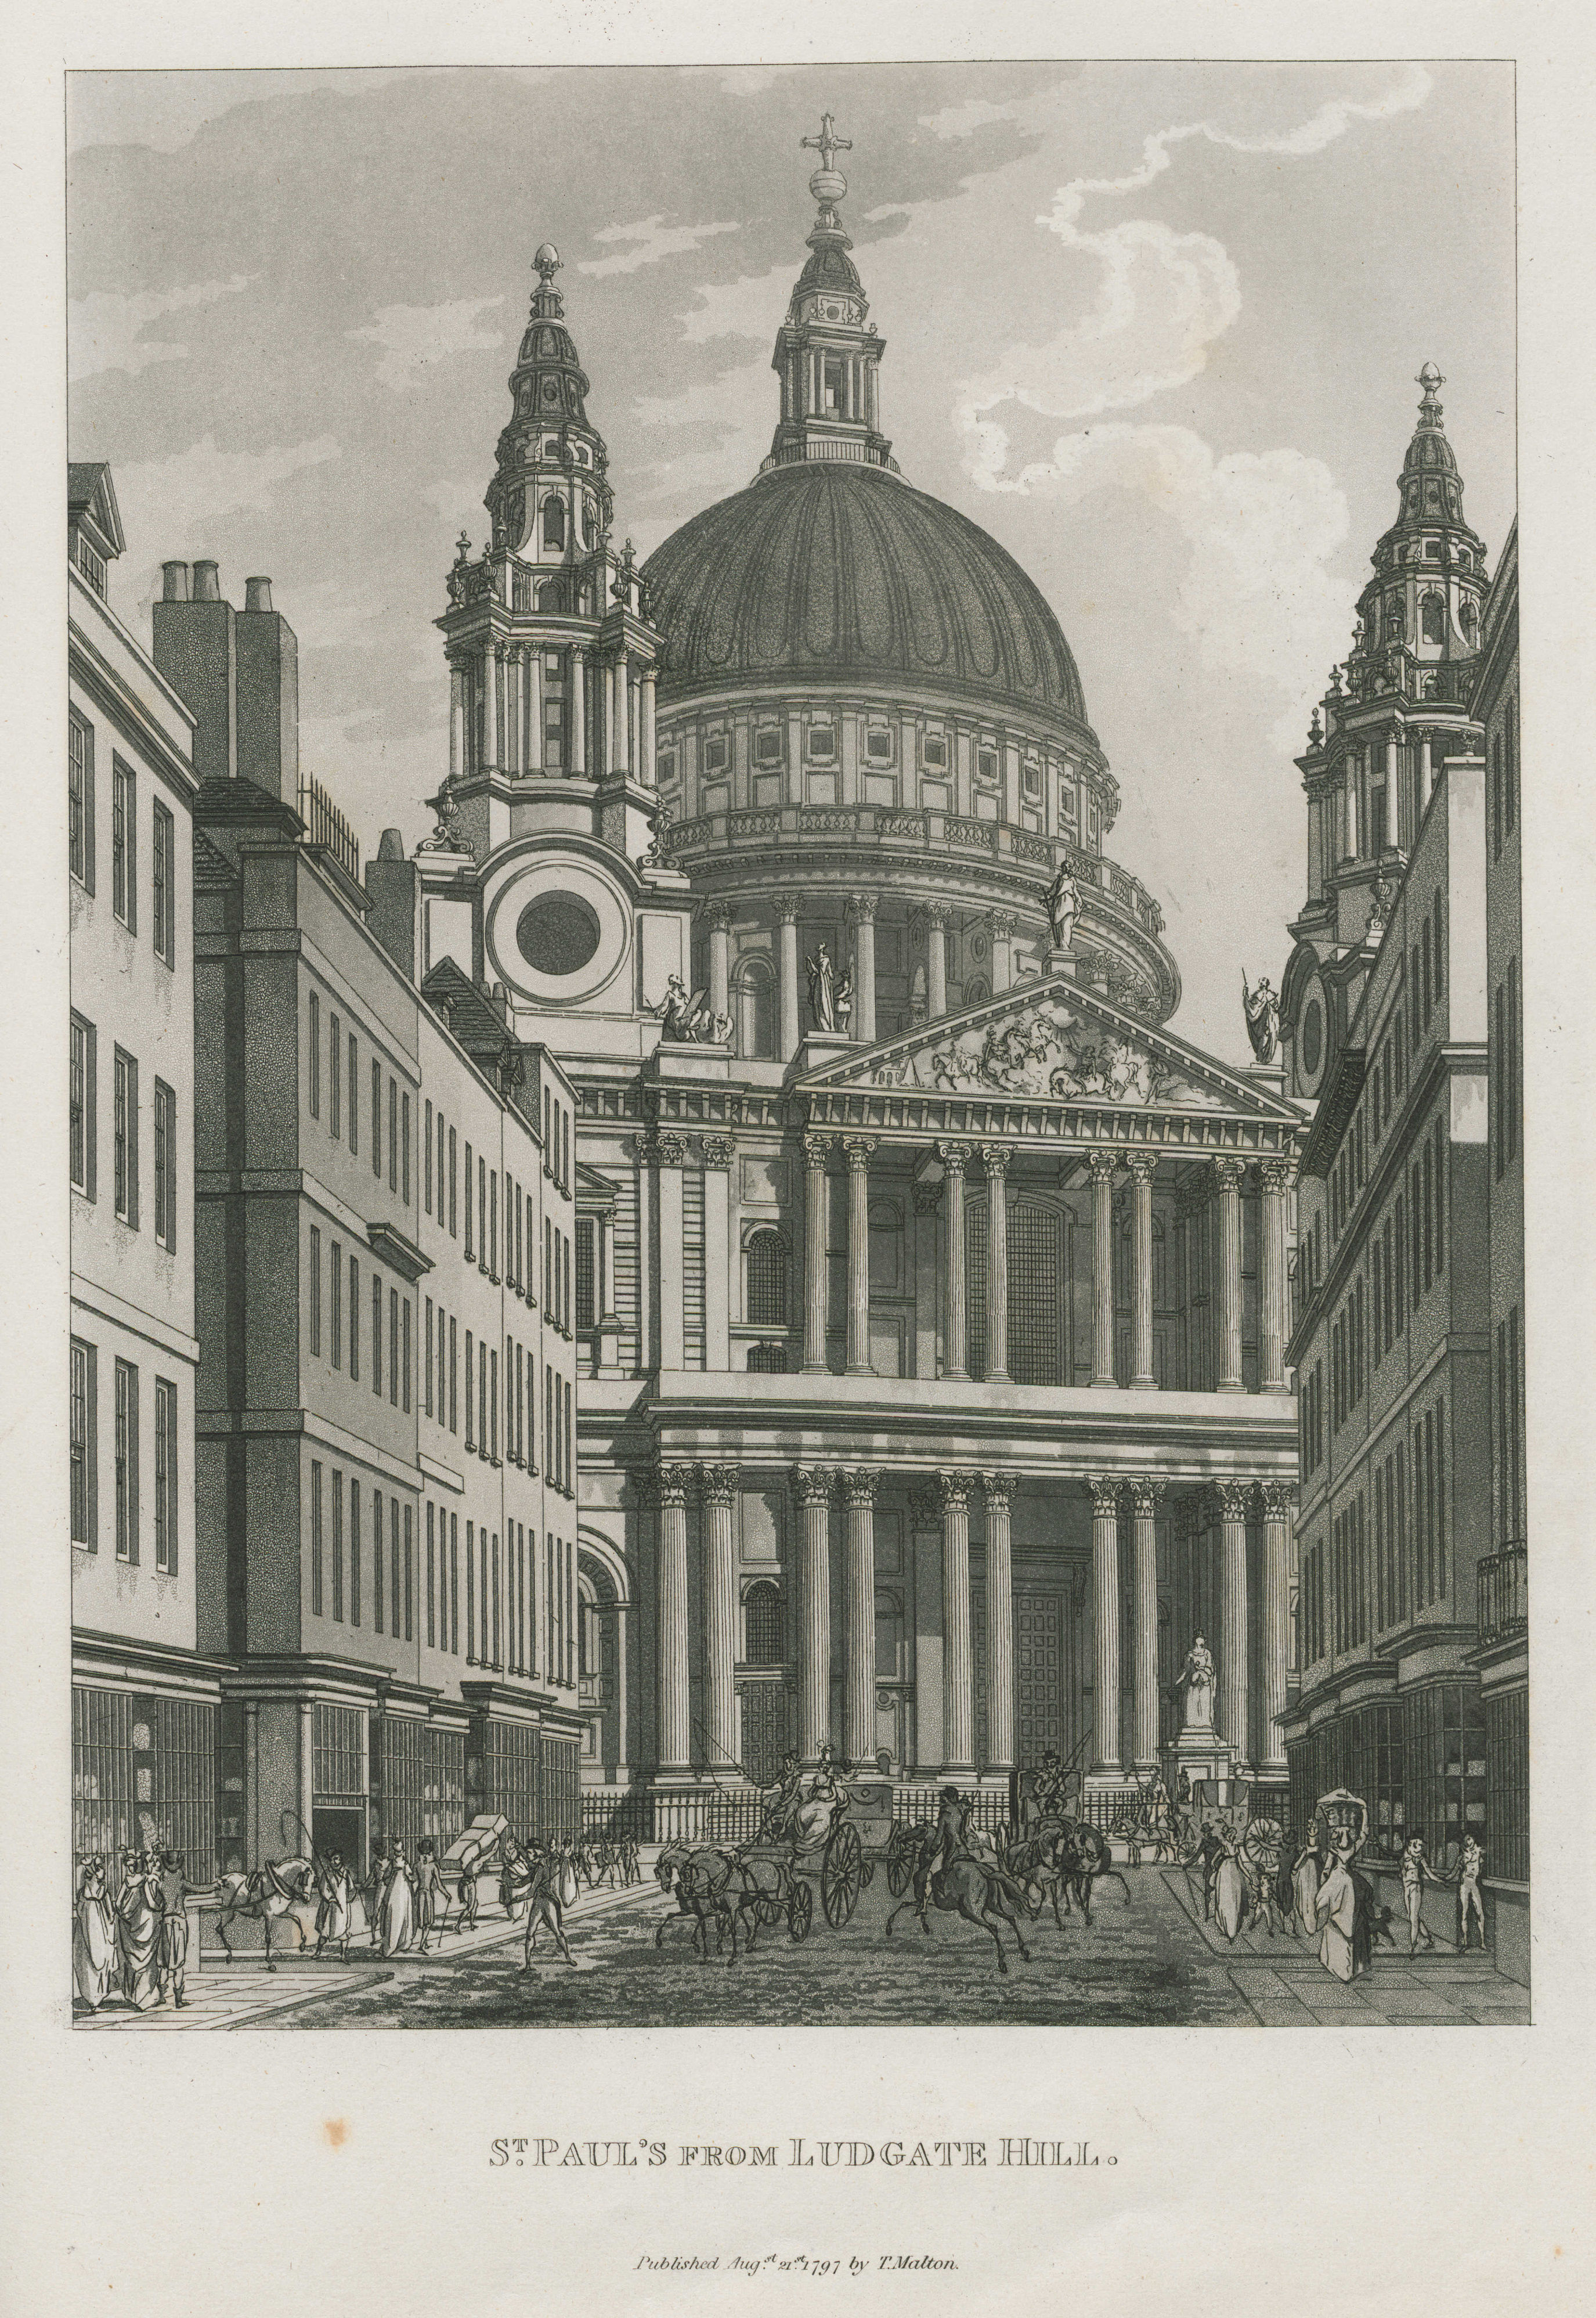 049 - Malton - St Paul's from Ludgate Hill